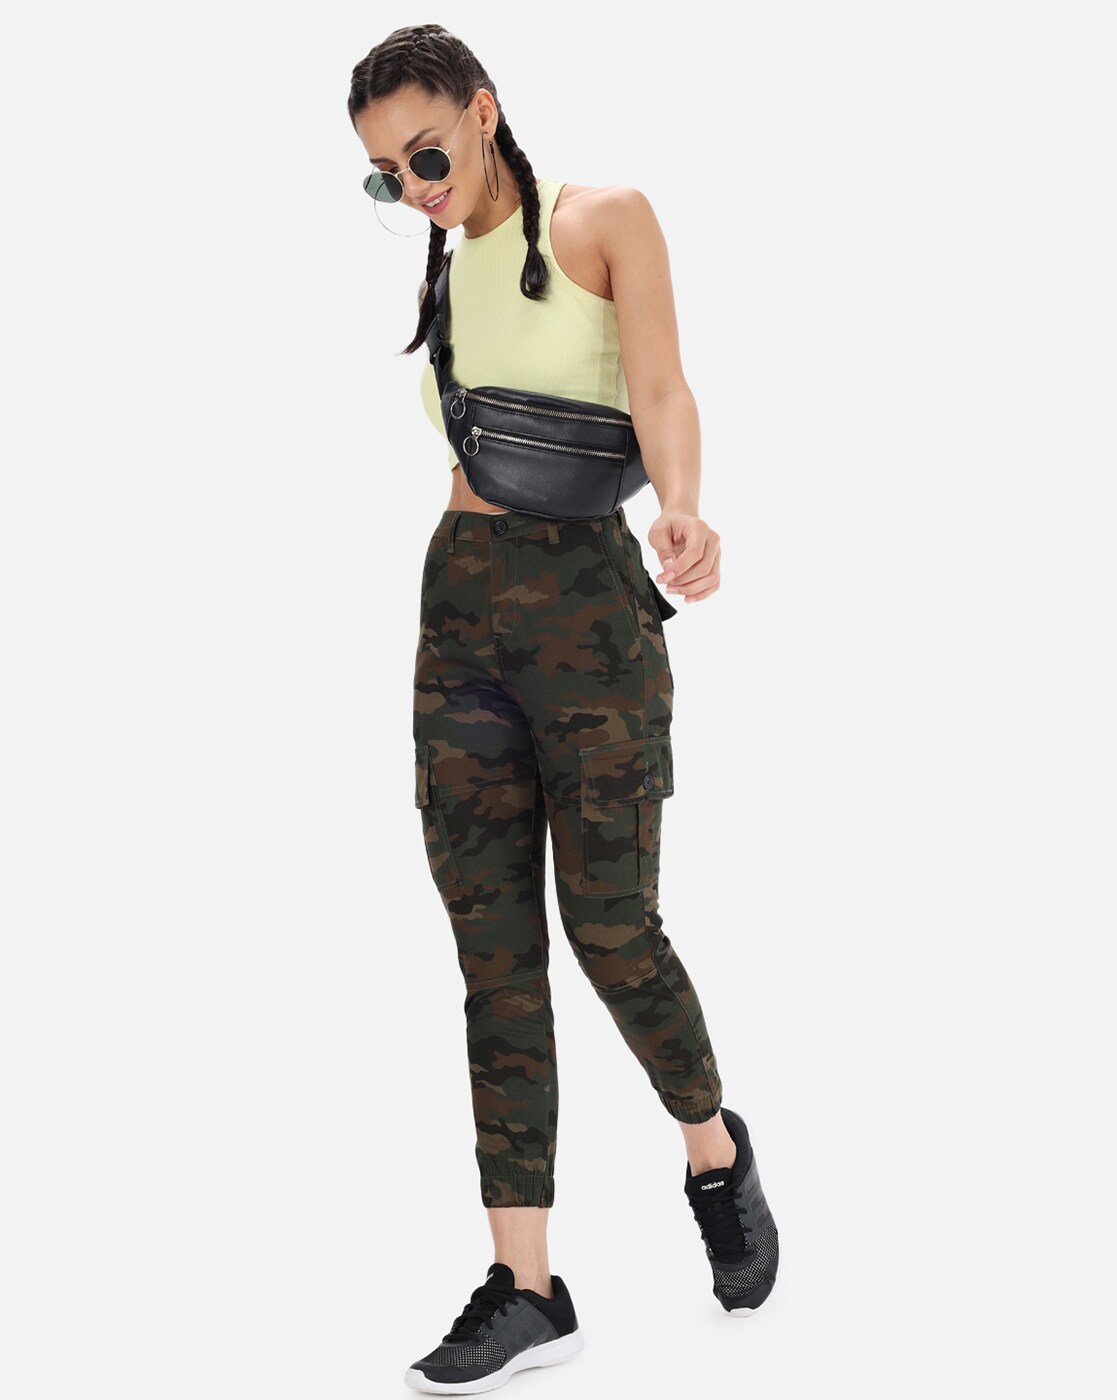 Buy पदनम Camouflage Cargo Pants Special Ops XXS at Amazonin